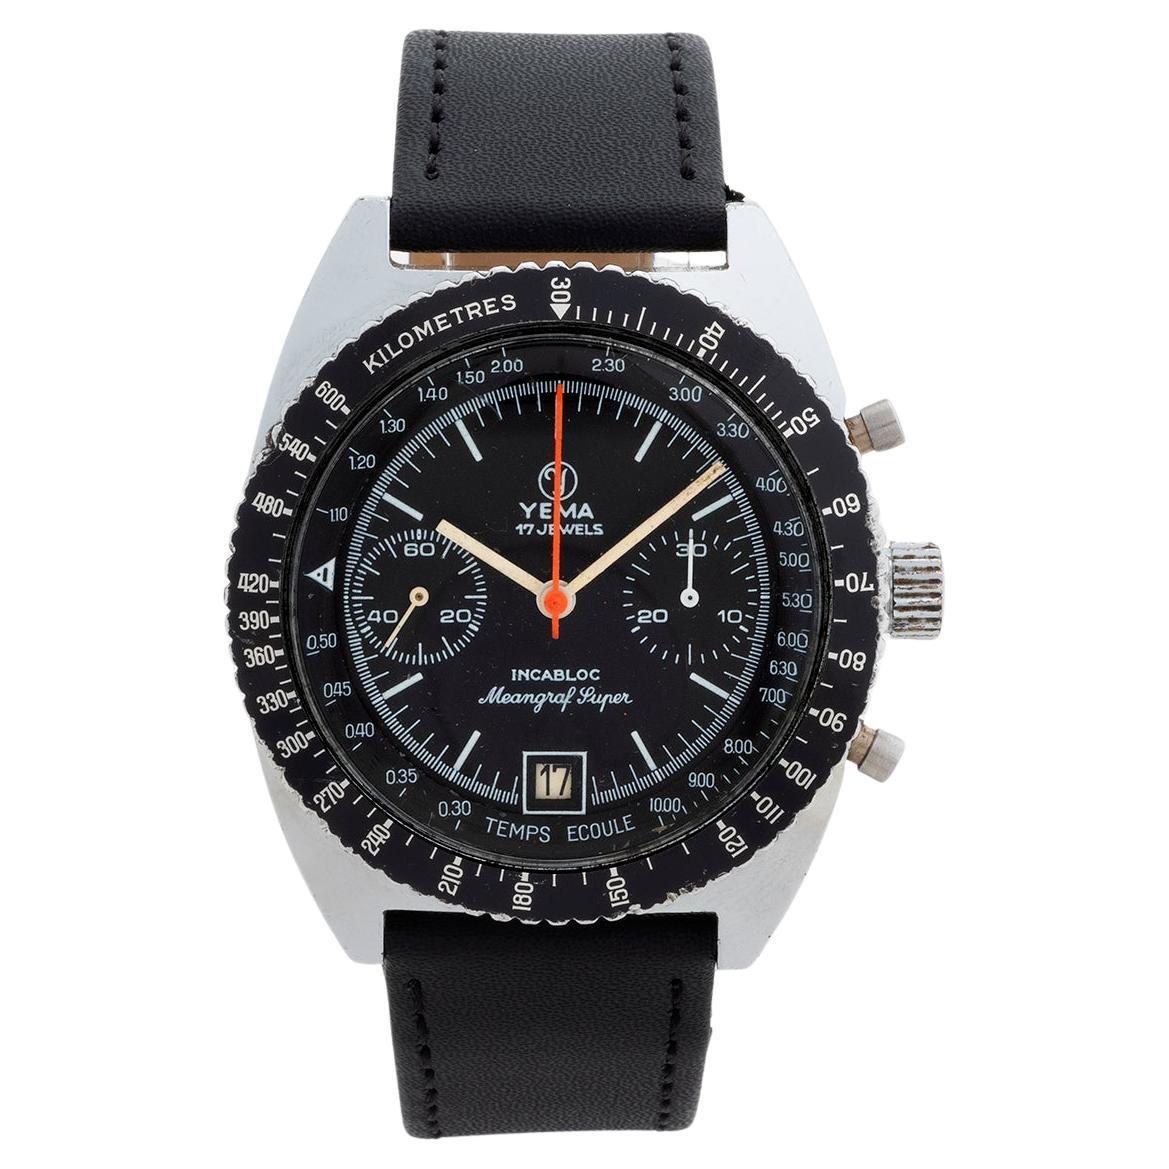 Yema Motorsports Chronograph Wristwatch. Meangraf Super (reference 721122). 1970 For Sale